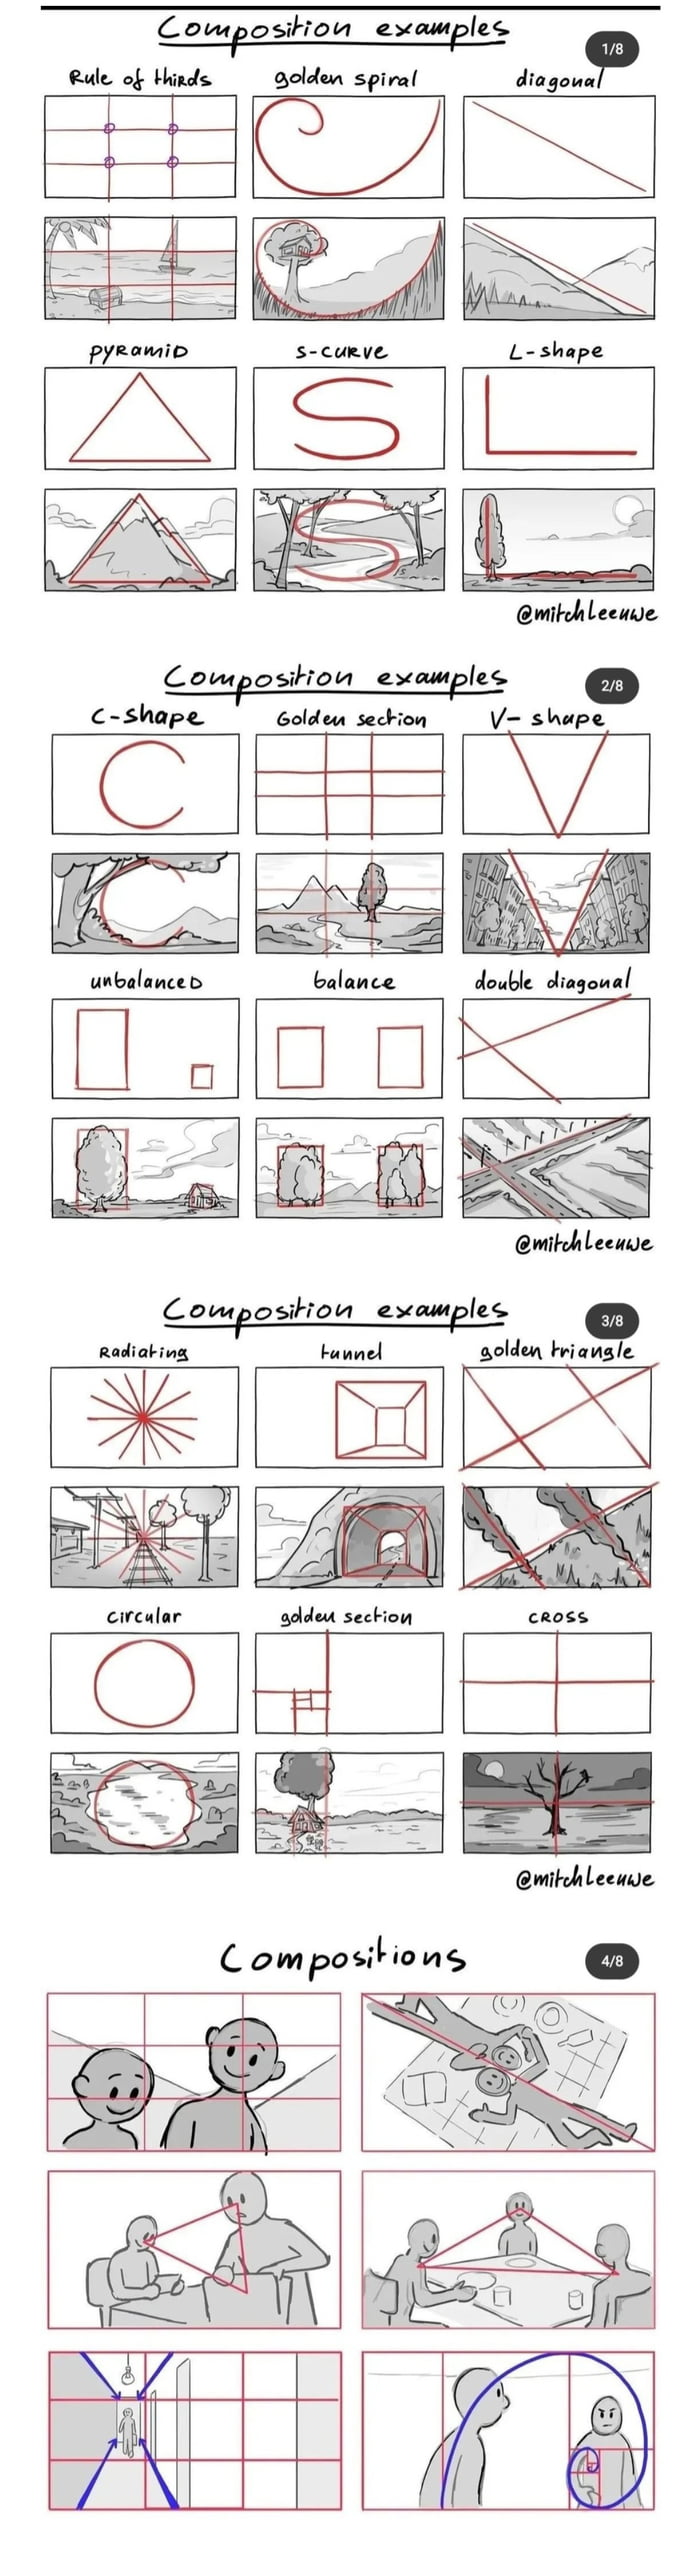 Composition examples - Photography Image